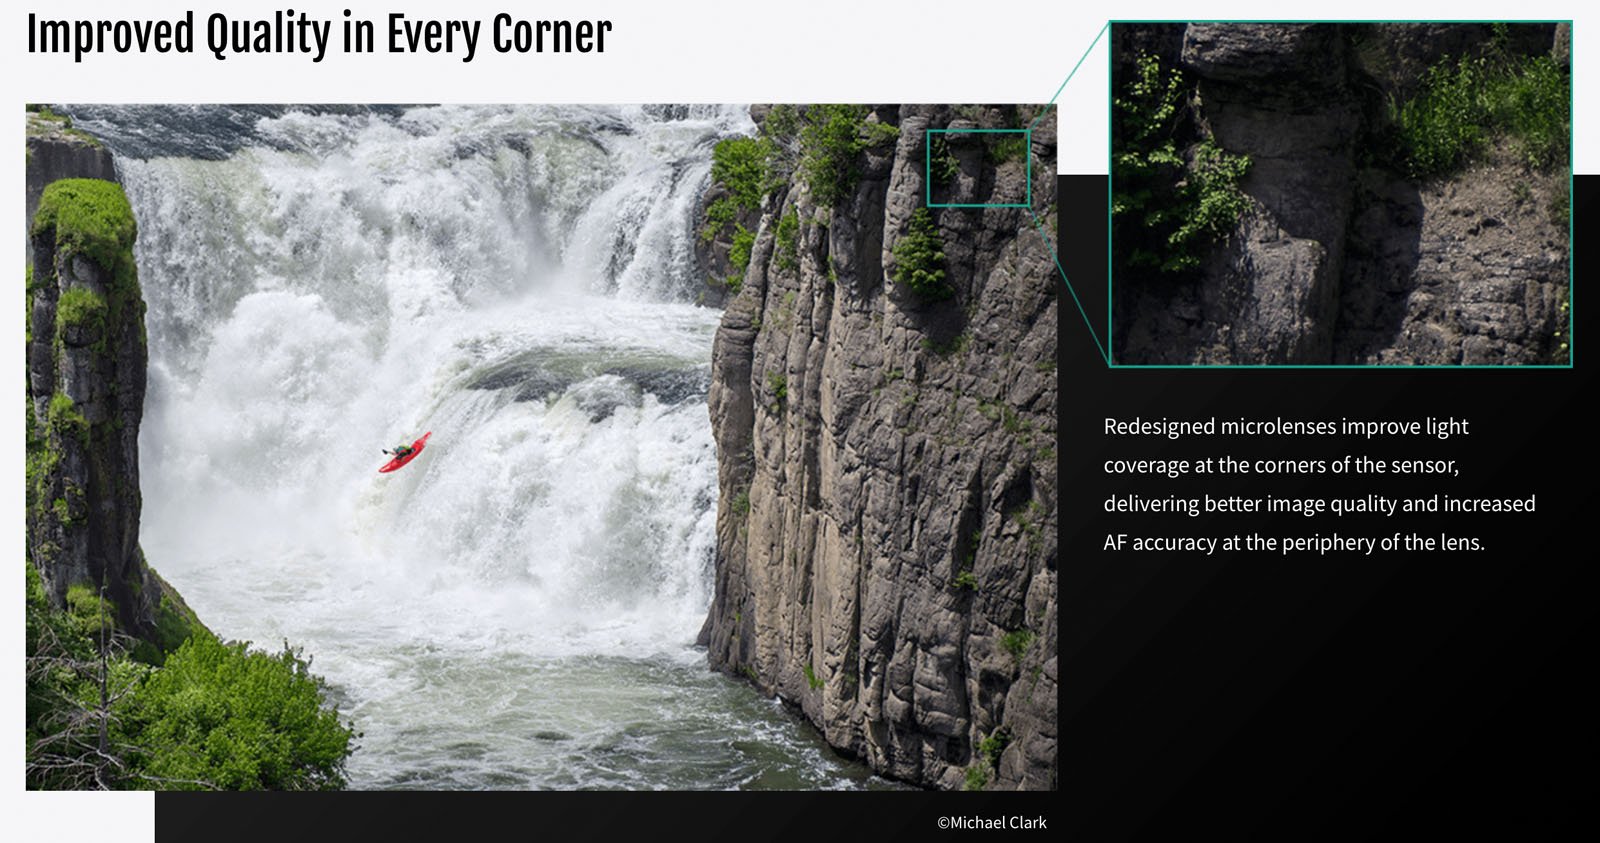 Image of a kayaker going over a waterfall surrounded by text. 